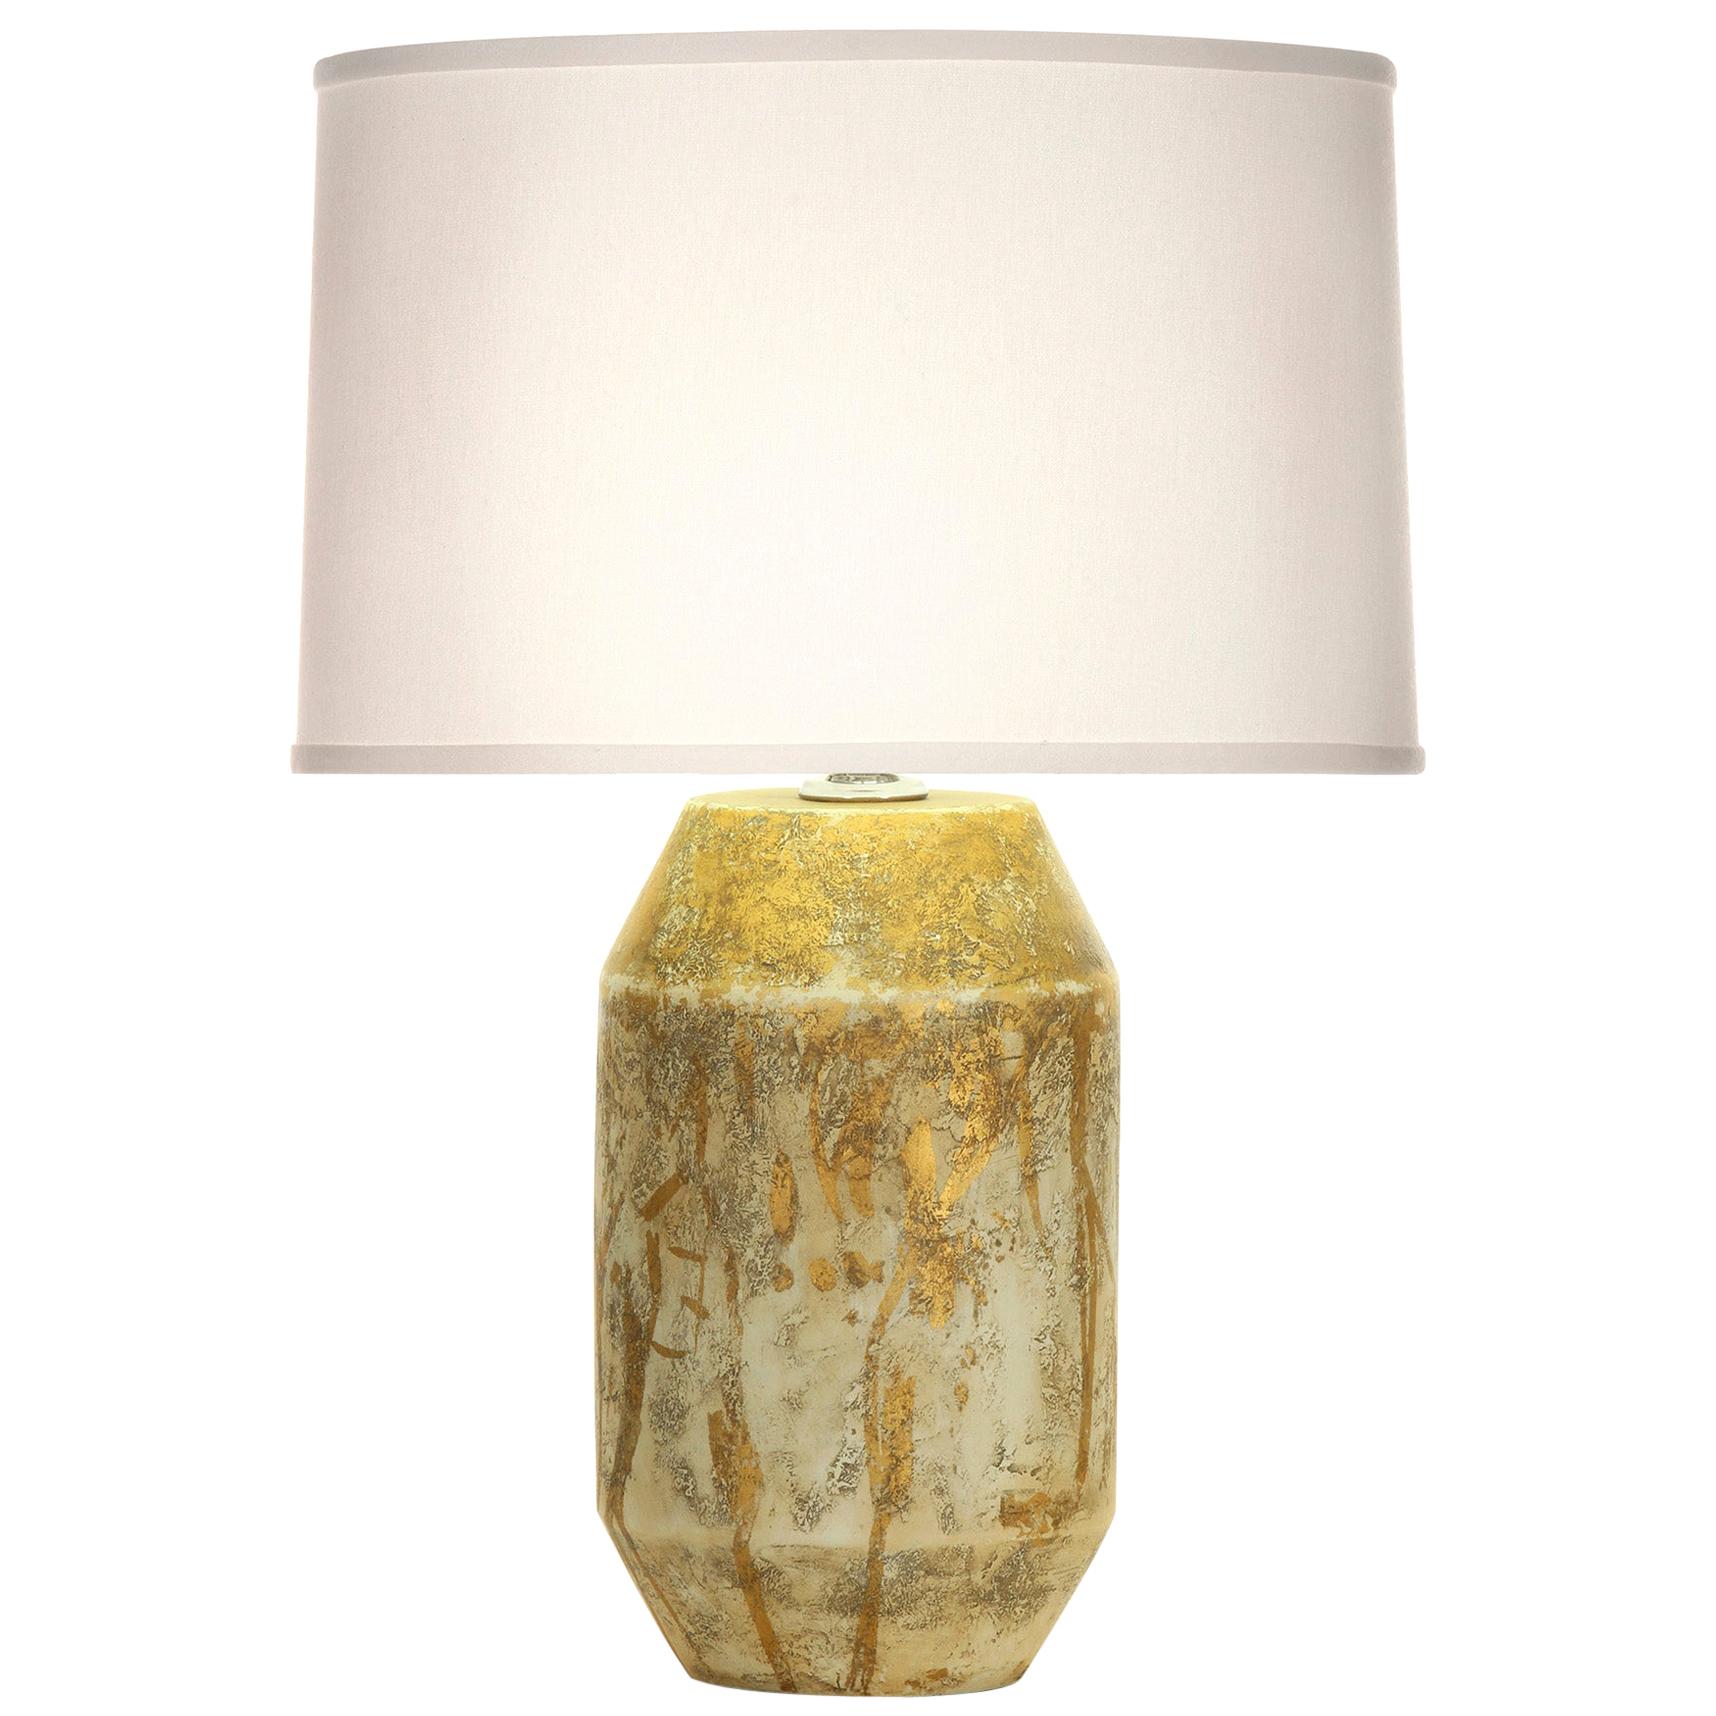 Henry Table Lamp in Gold and Cream Ceramic by CuratedKravet